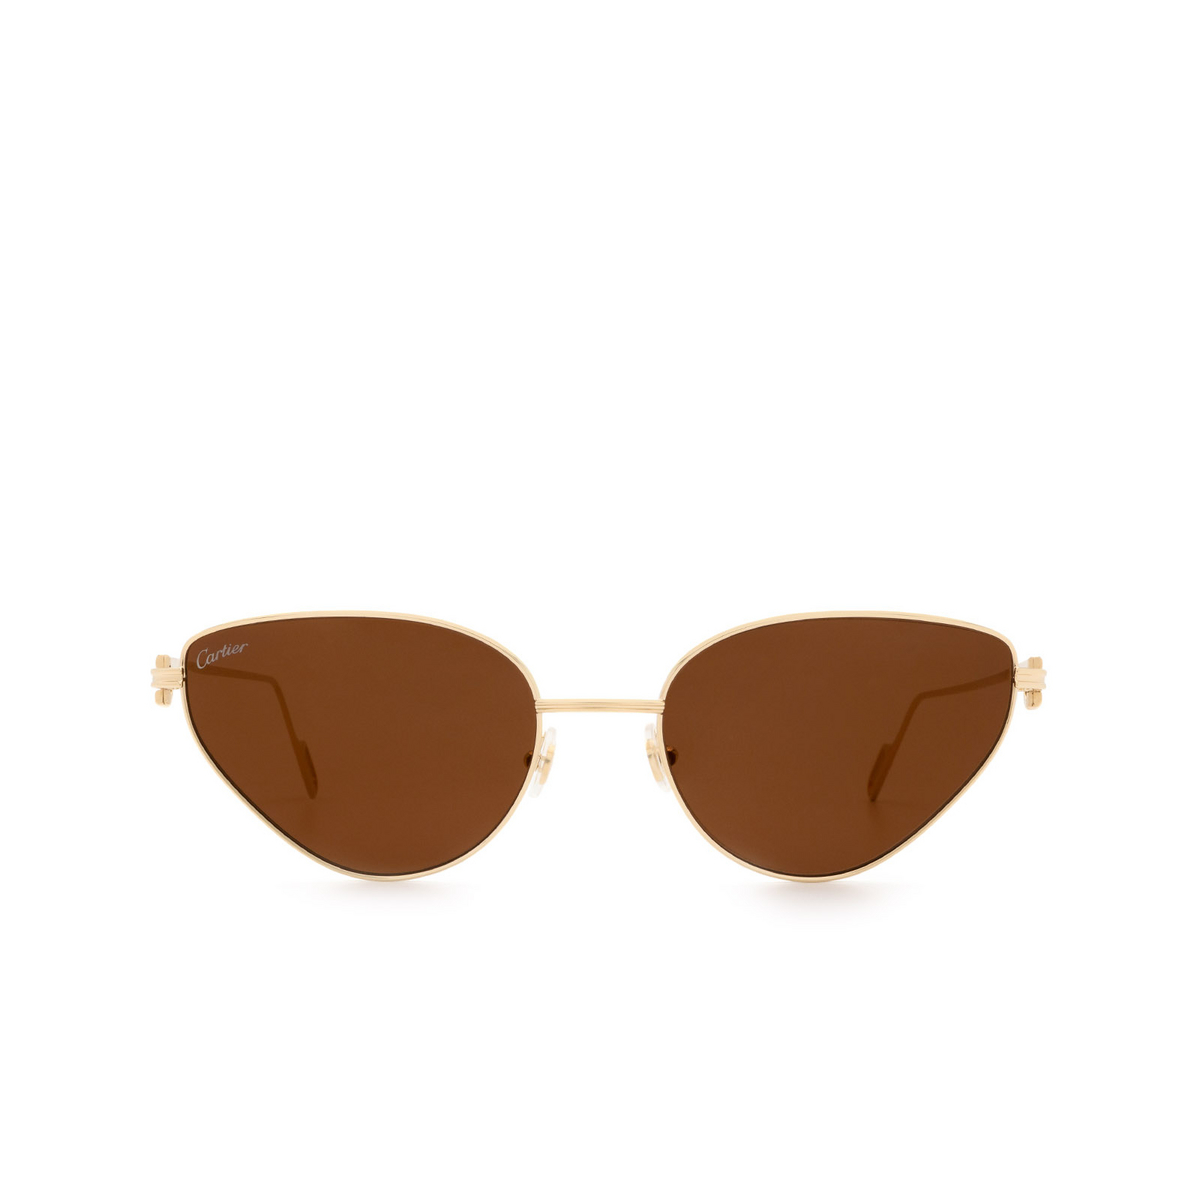 Cartier® Cat-eye Sunglasses: CT0155S color Gold 002 - front view.